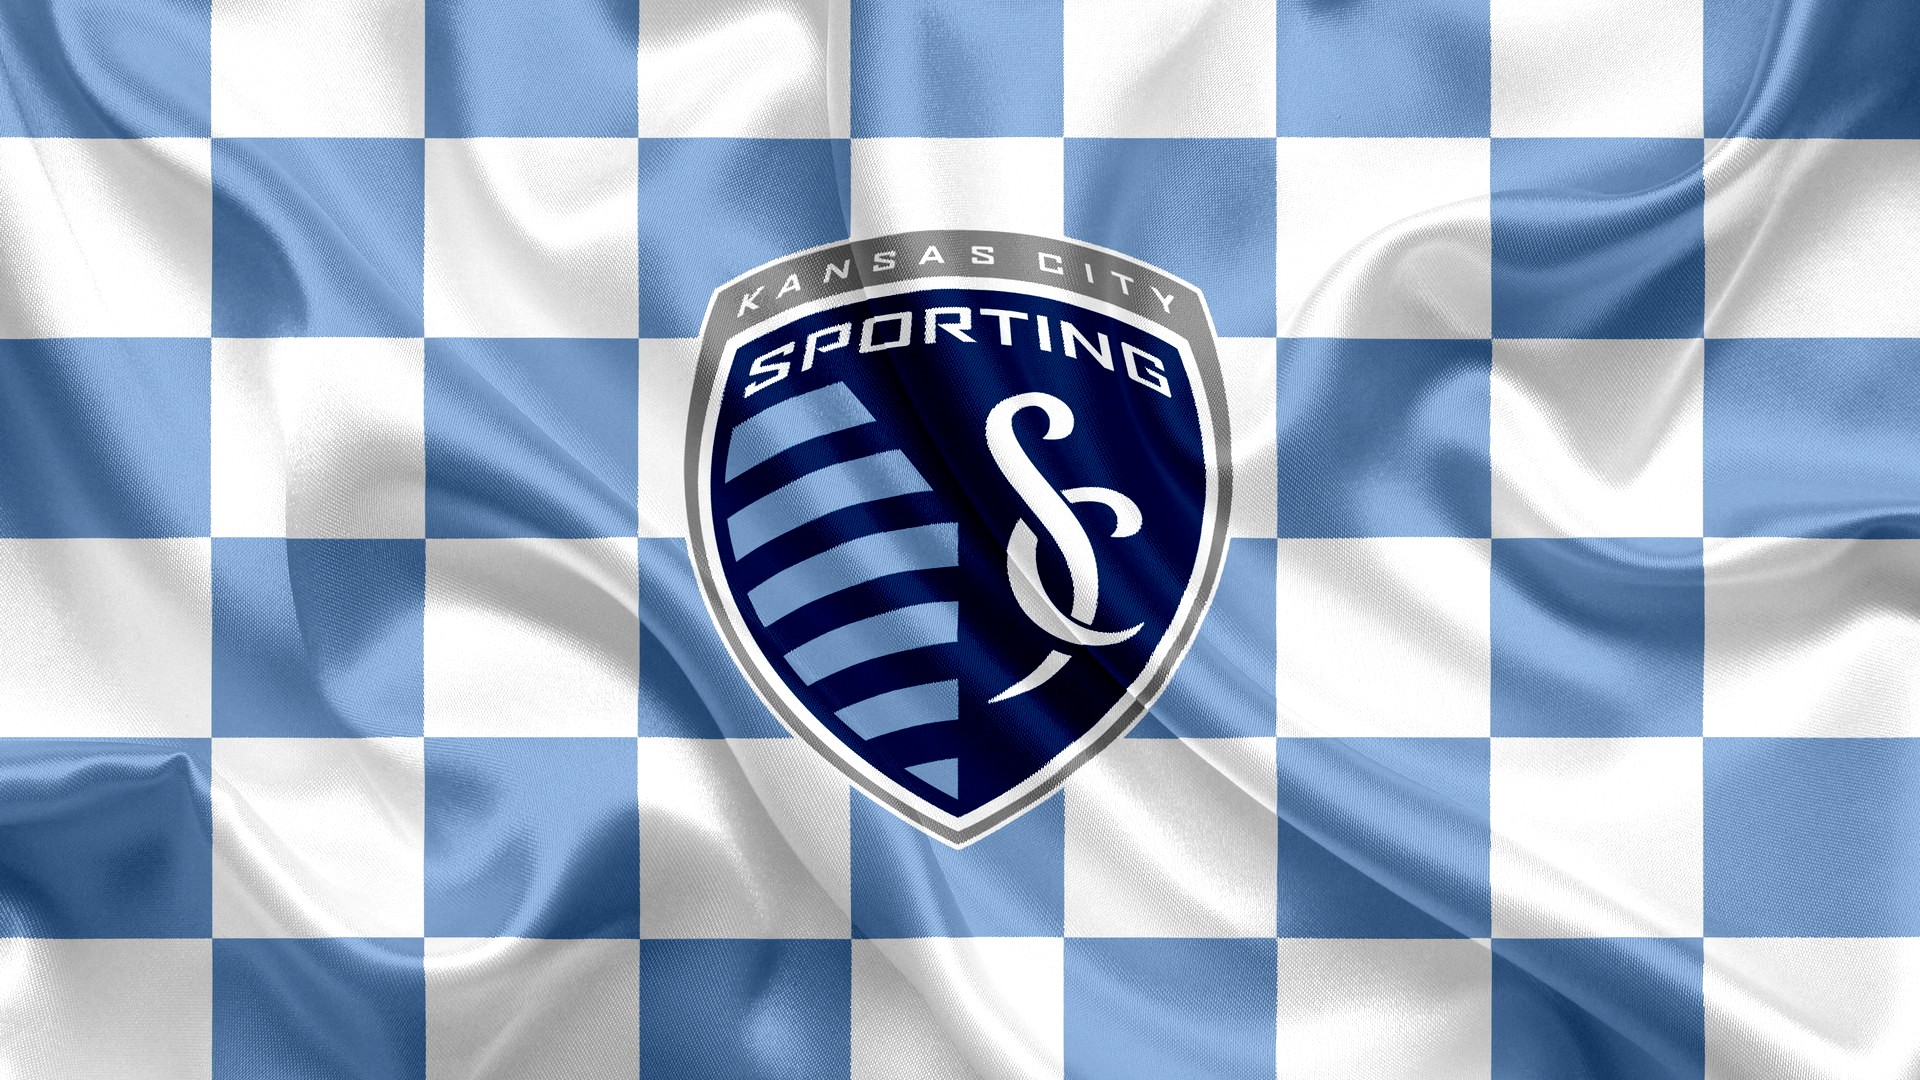 HD Sporting Kansas City Wallpapers With high-resolution 1920X1080 pixel. You can use this wallpaper for your Desktop Computers, Mac Screensavers, Windows Backgrounds, iPhone Wallpapers, Tablet or Android Lock screen and another Mobile device